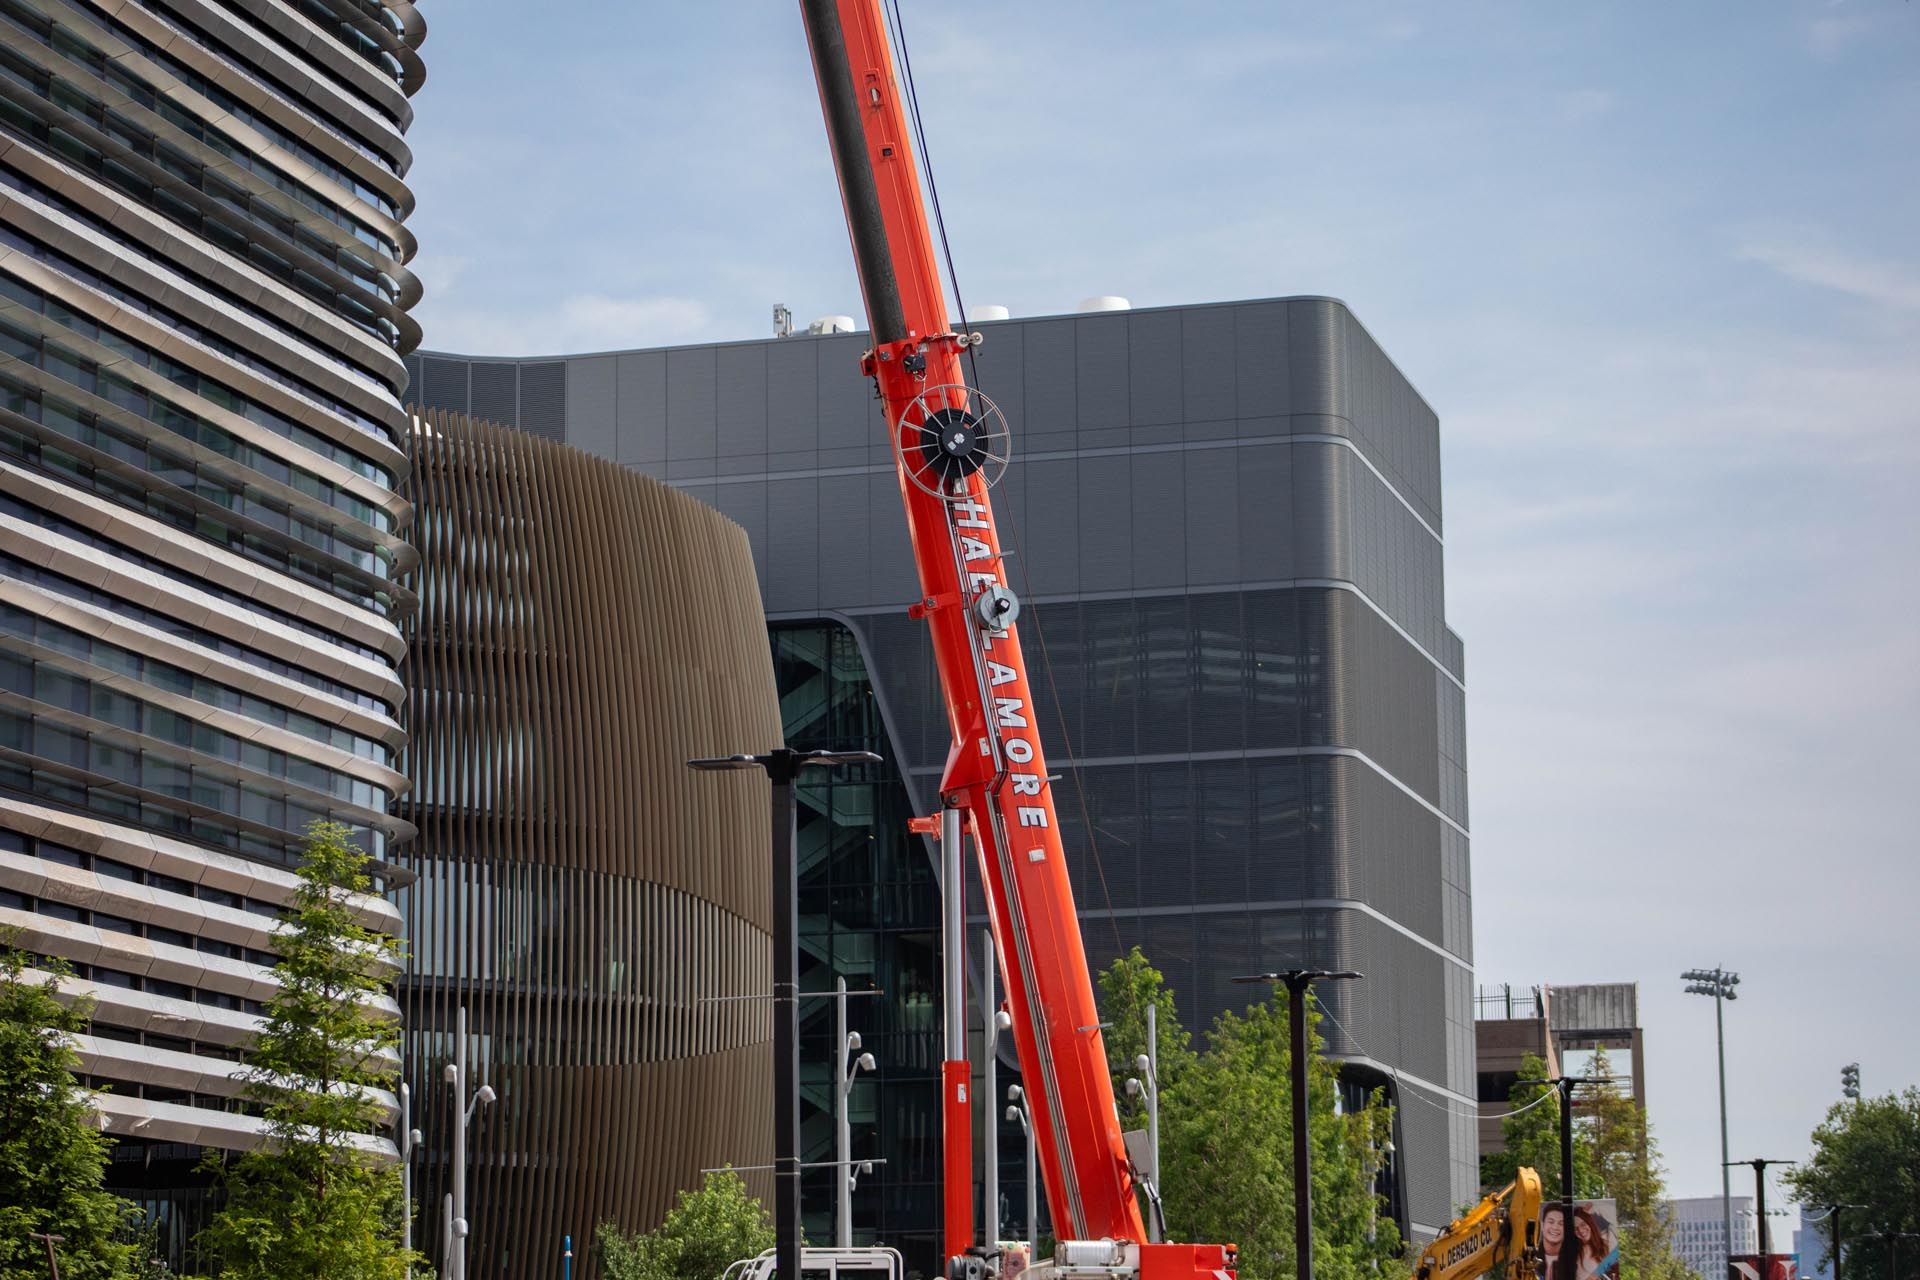 Hallamore Corporation is a crane company offering commercial crane services.